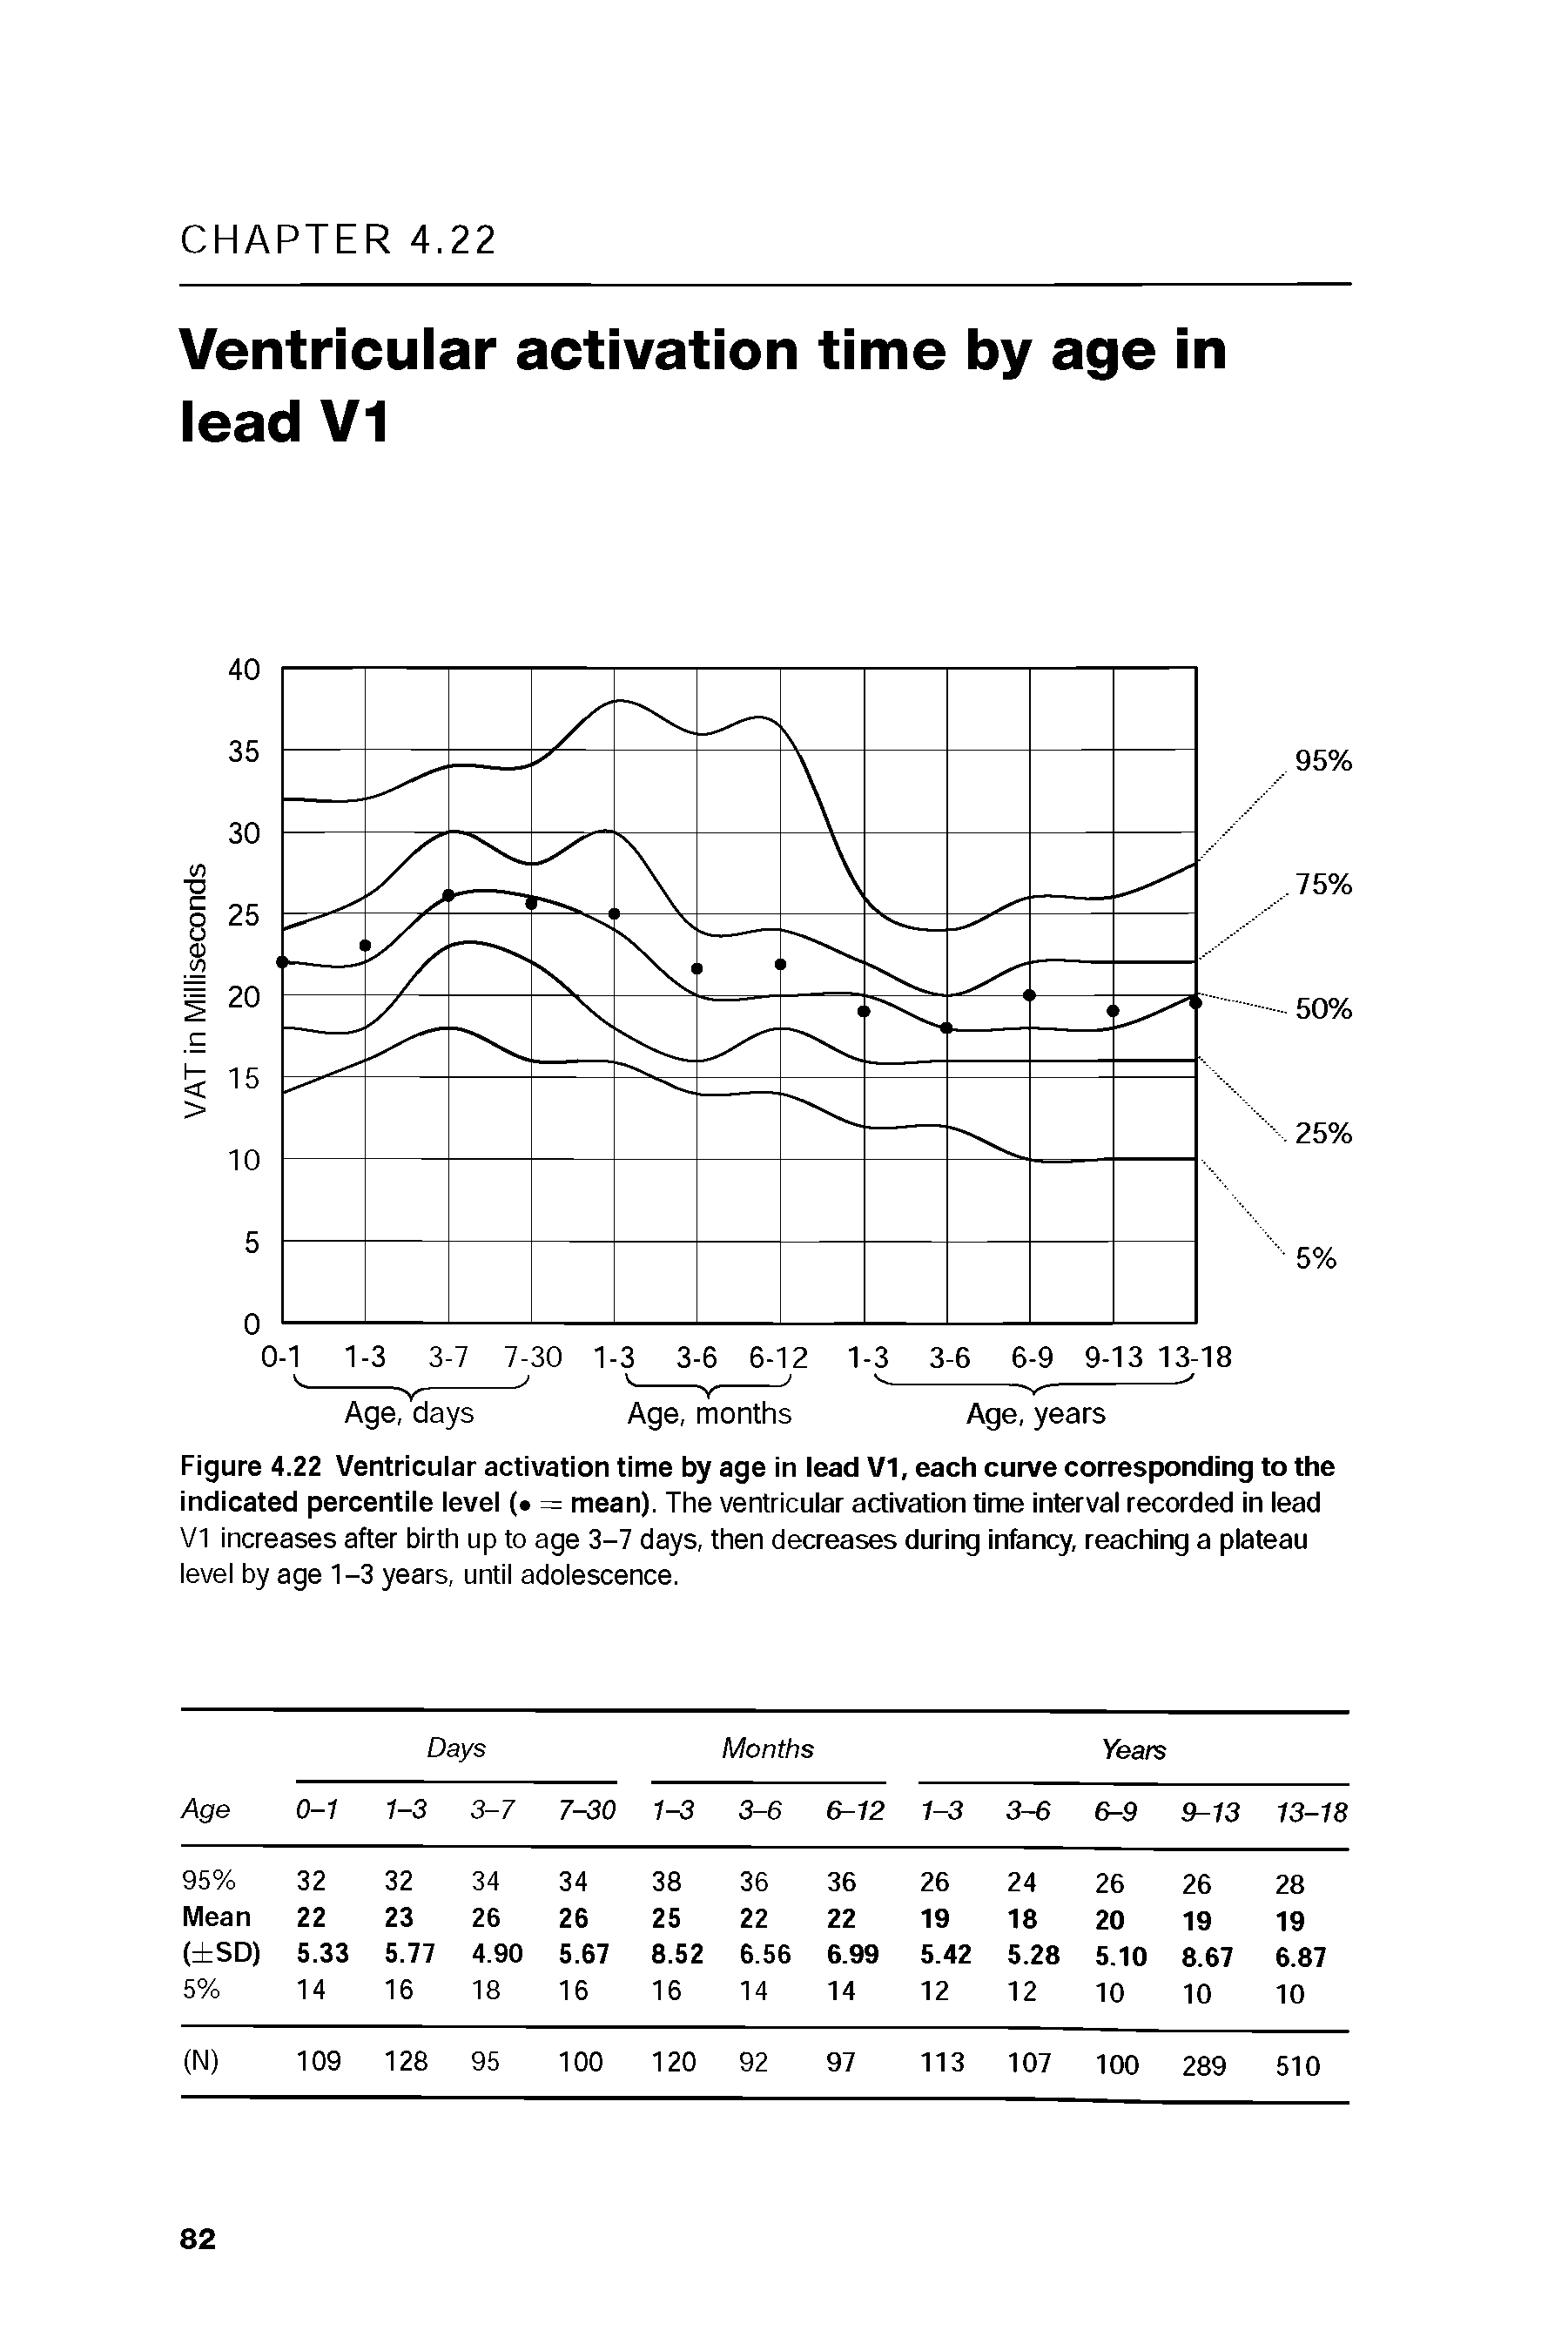 Figure 4.22 Ventricular activation time by age in lead V1, each curve corresponding to the indicated percentile level ( = mean). The ventricular activation time interval recorded in lead VI increases after birth up to age 3-7 days, then decreases during infancy, reaching a plateau level by age 1-3 years, until adolescence.